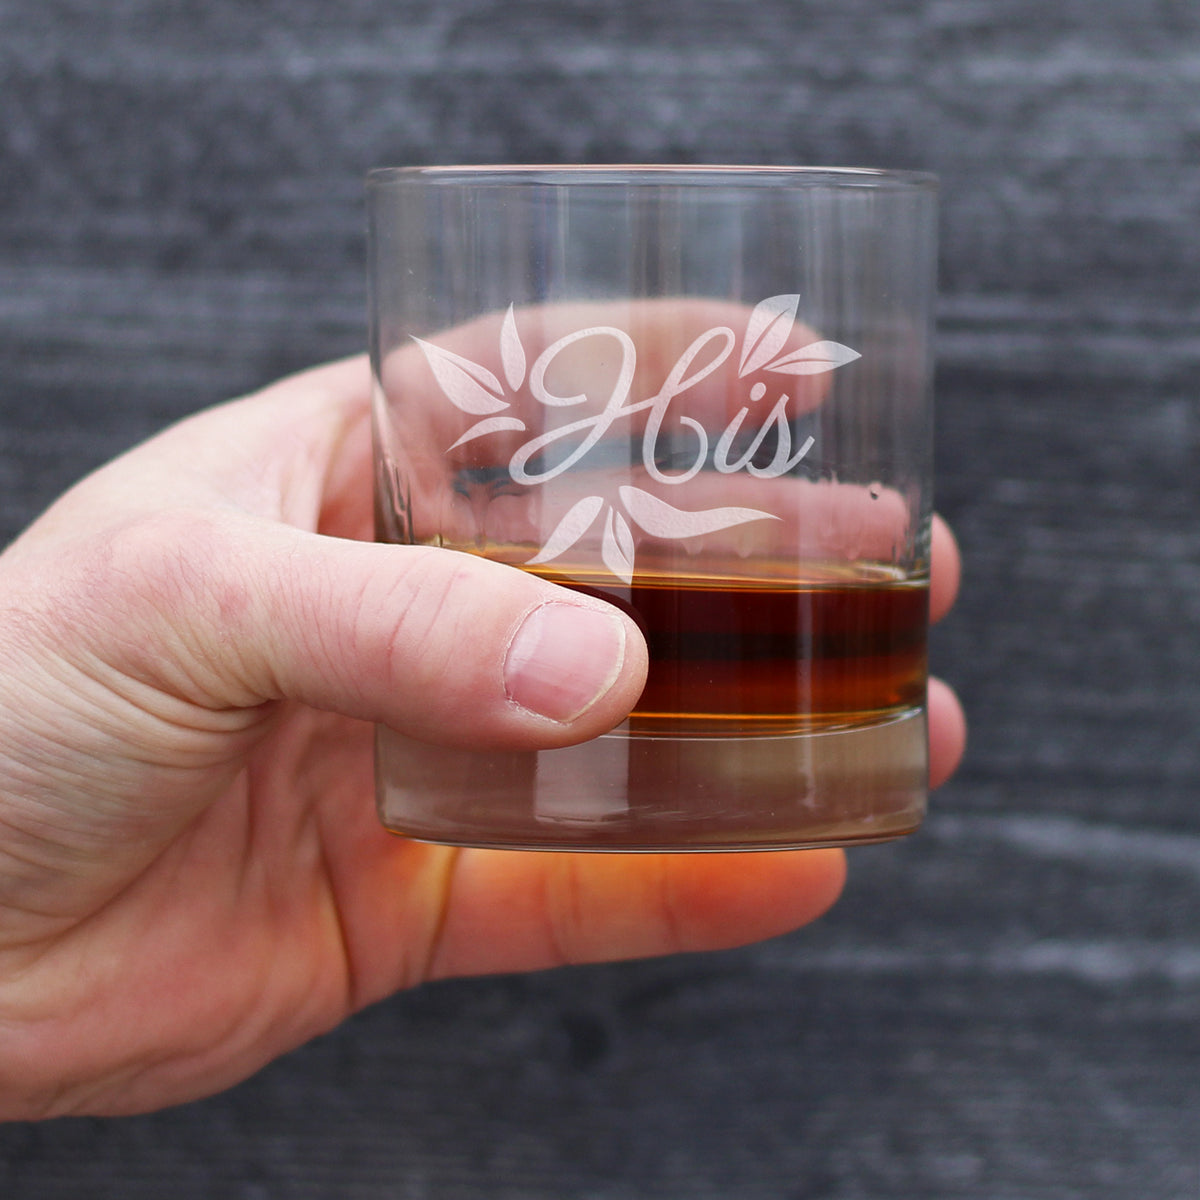 His Old Fashioned Rocks Glass - Unique Wedding Gift for Groom - Engraved Wedding Cup Gift